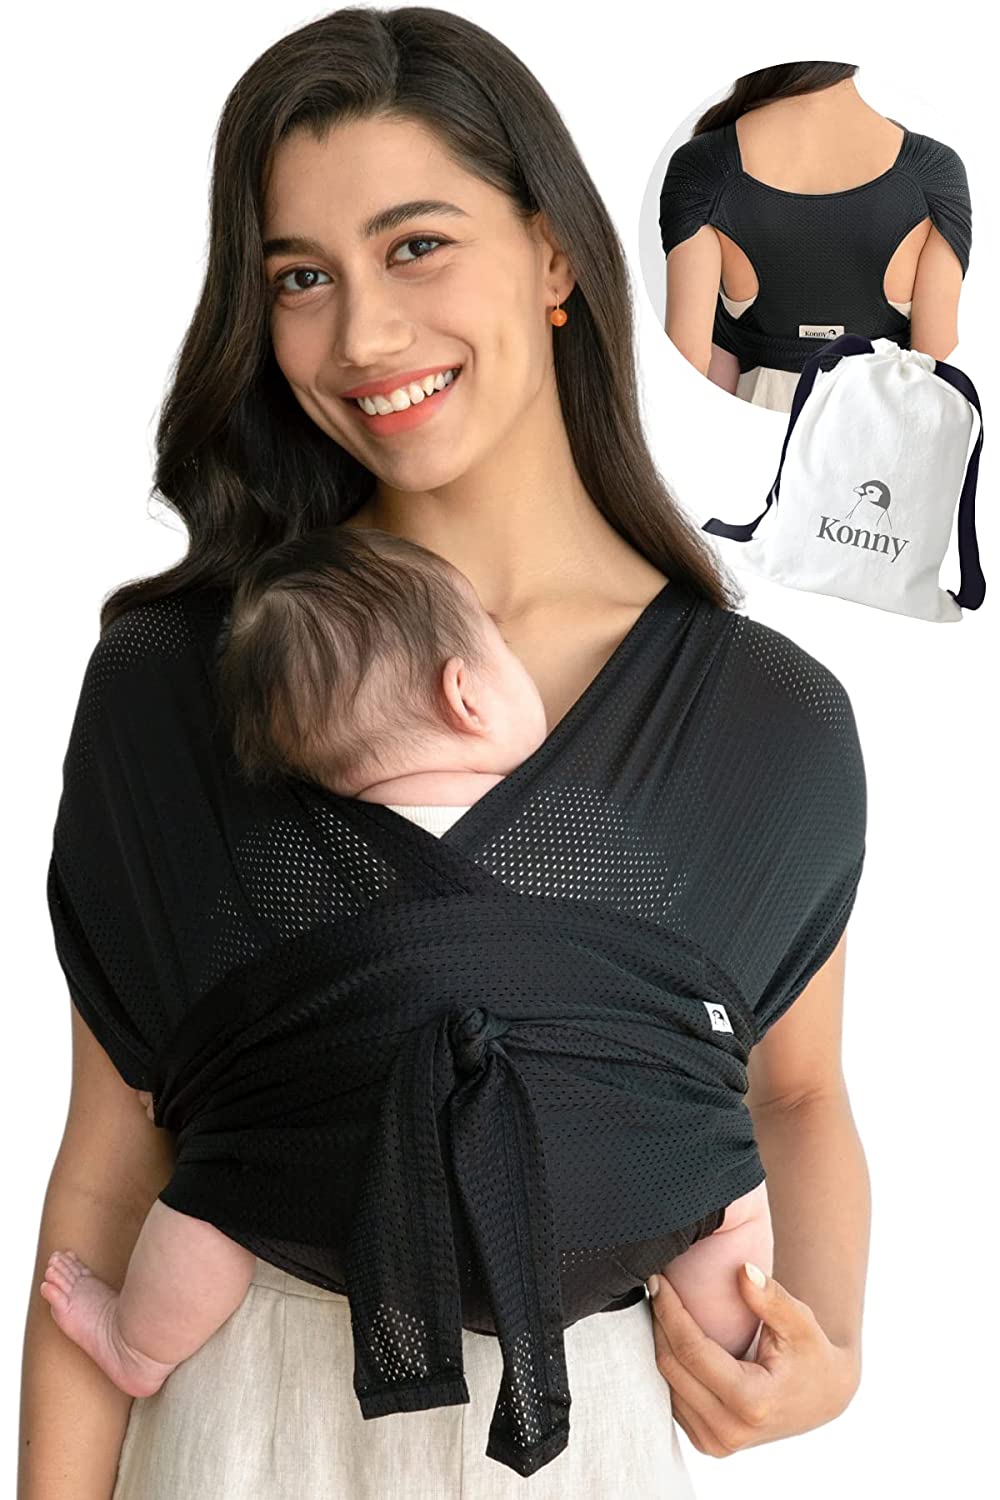 Konny Air Mesh Baby Carrier | Ultra Lightweight, Hassle-Free Baby Wrap | Newborns, Infants up to 20 kg Toddlers | Cool and Breathable Fabric | Useful Sleep Solution (Black, M)